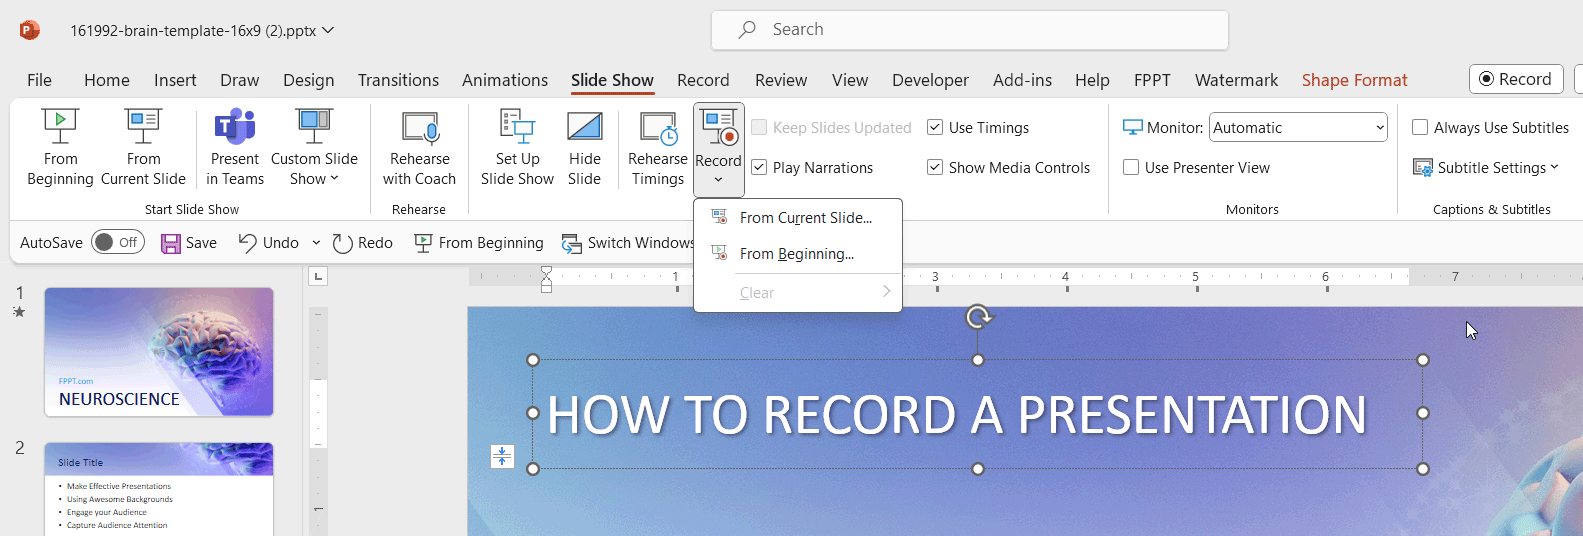 How to record a slide show presentation in PowerPoint from Current Slide or From Beginning.